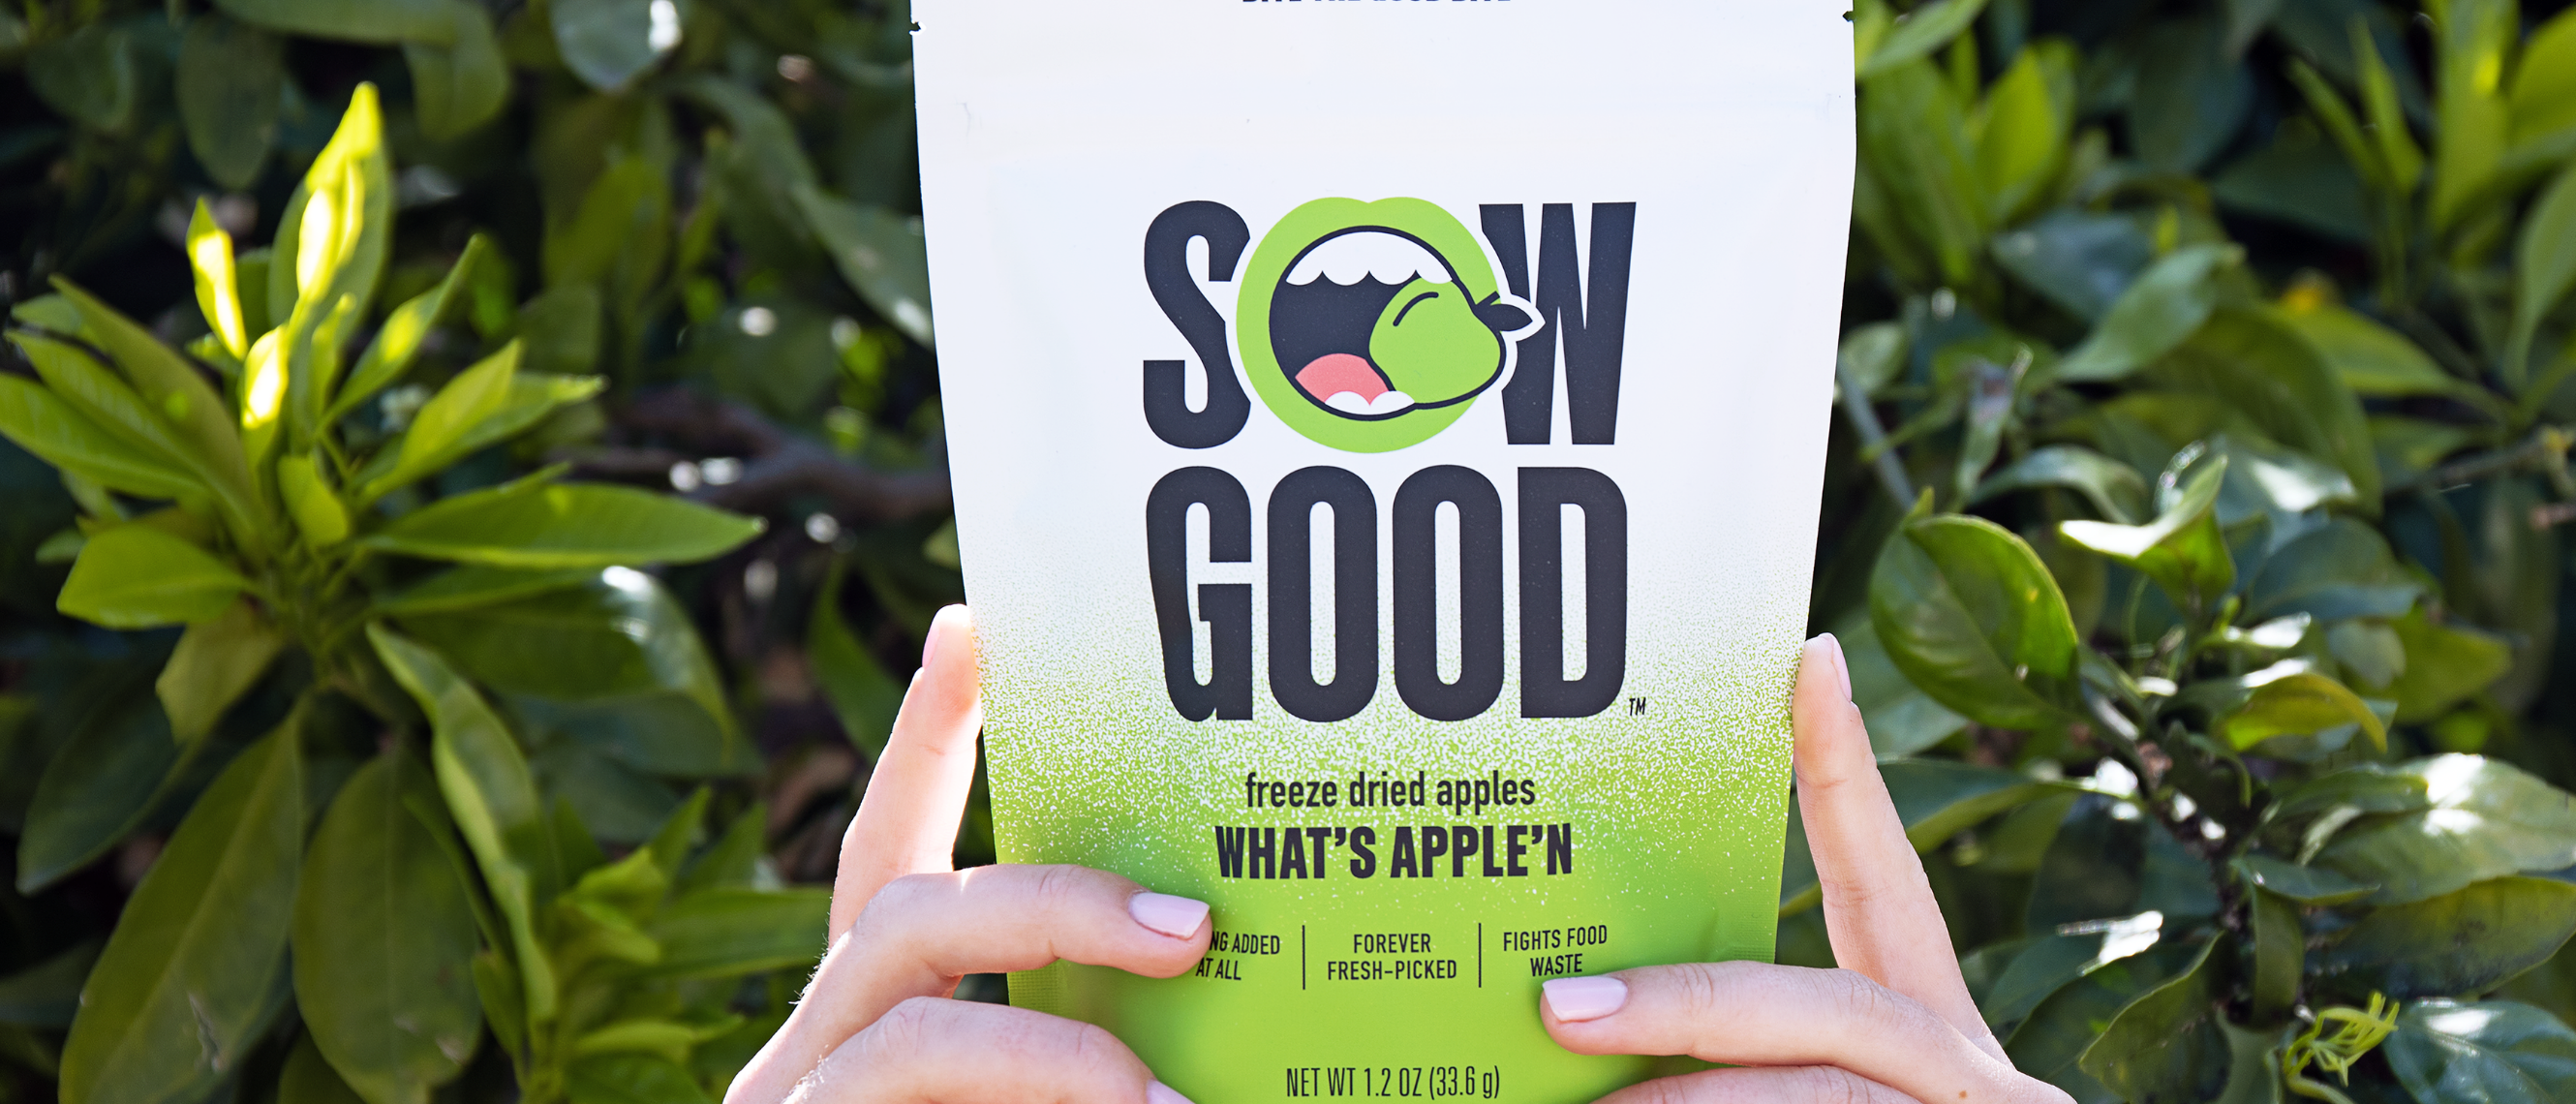 Sow Good freeze dried apples inside the Oh Goodie snack box subscription